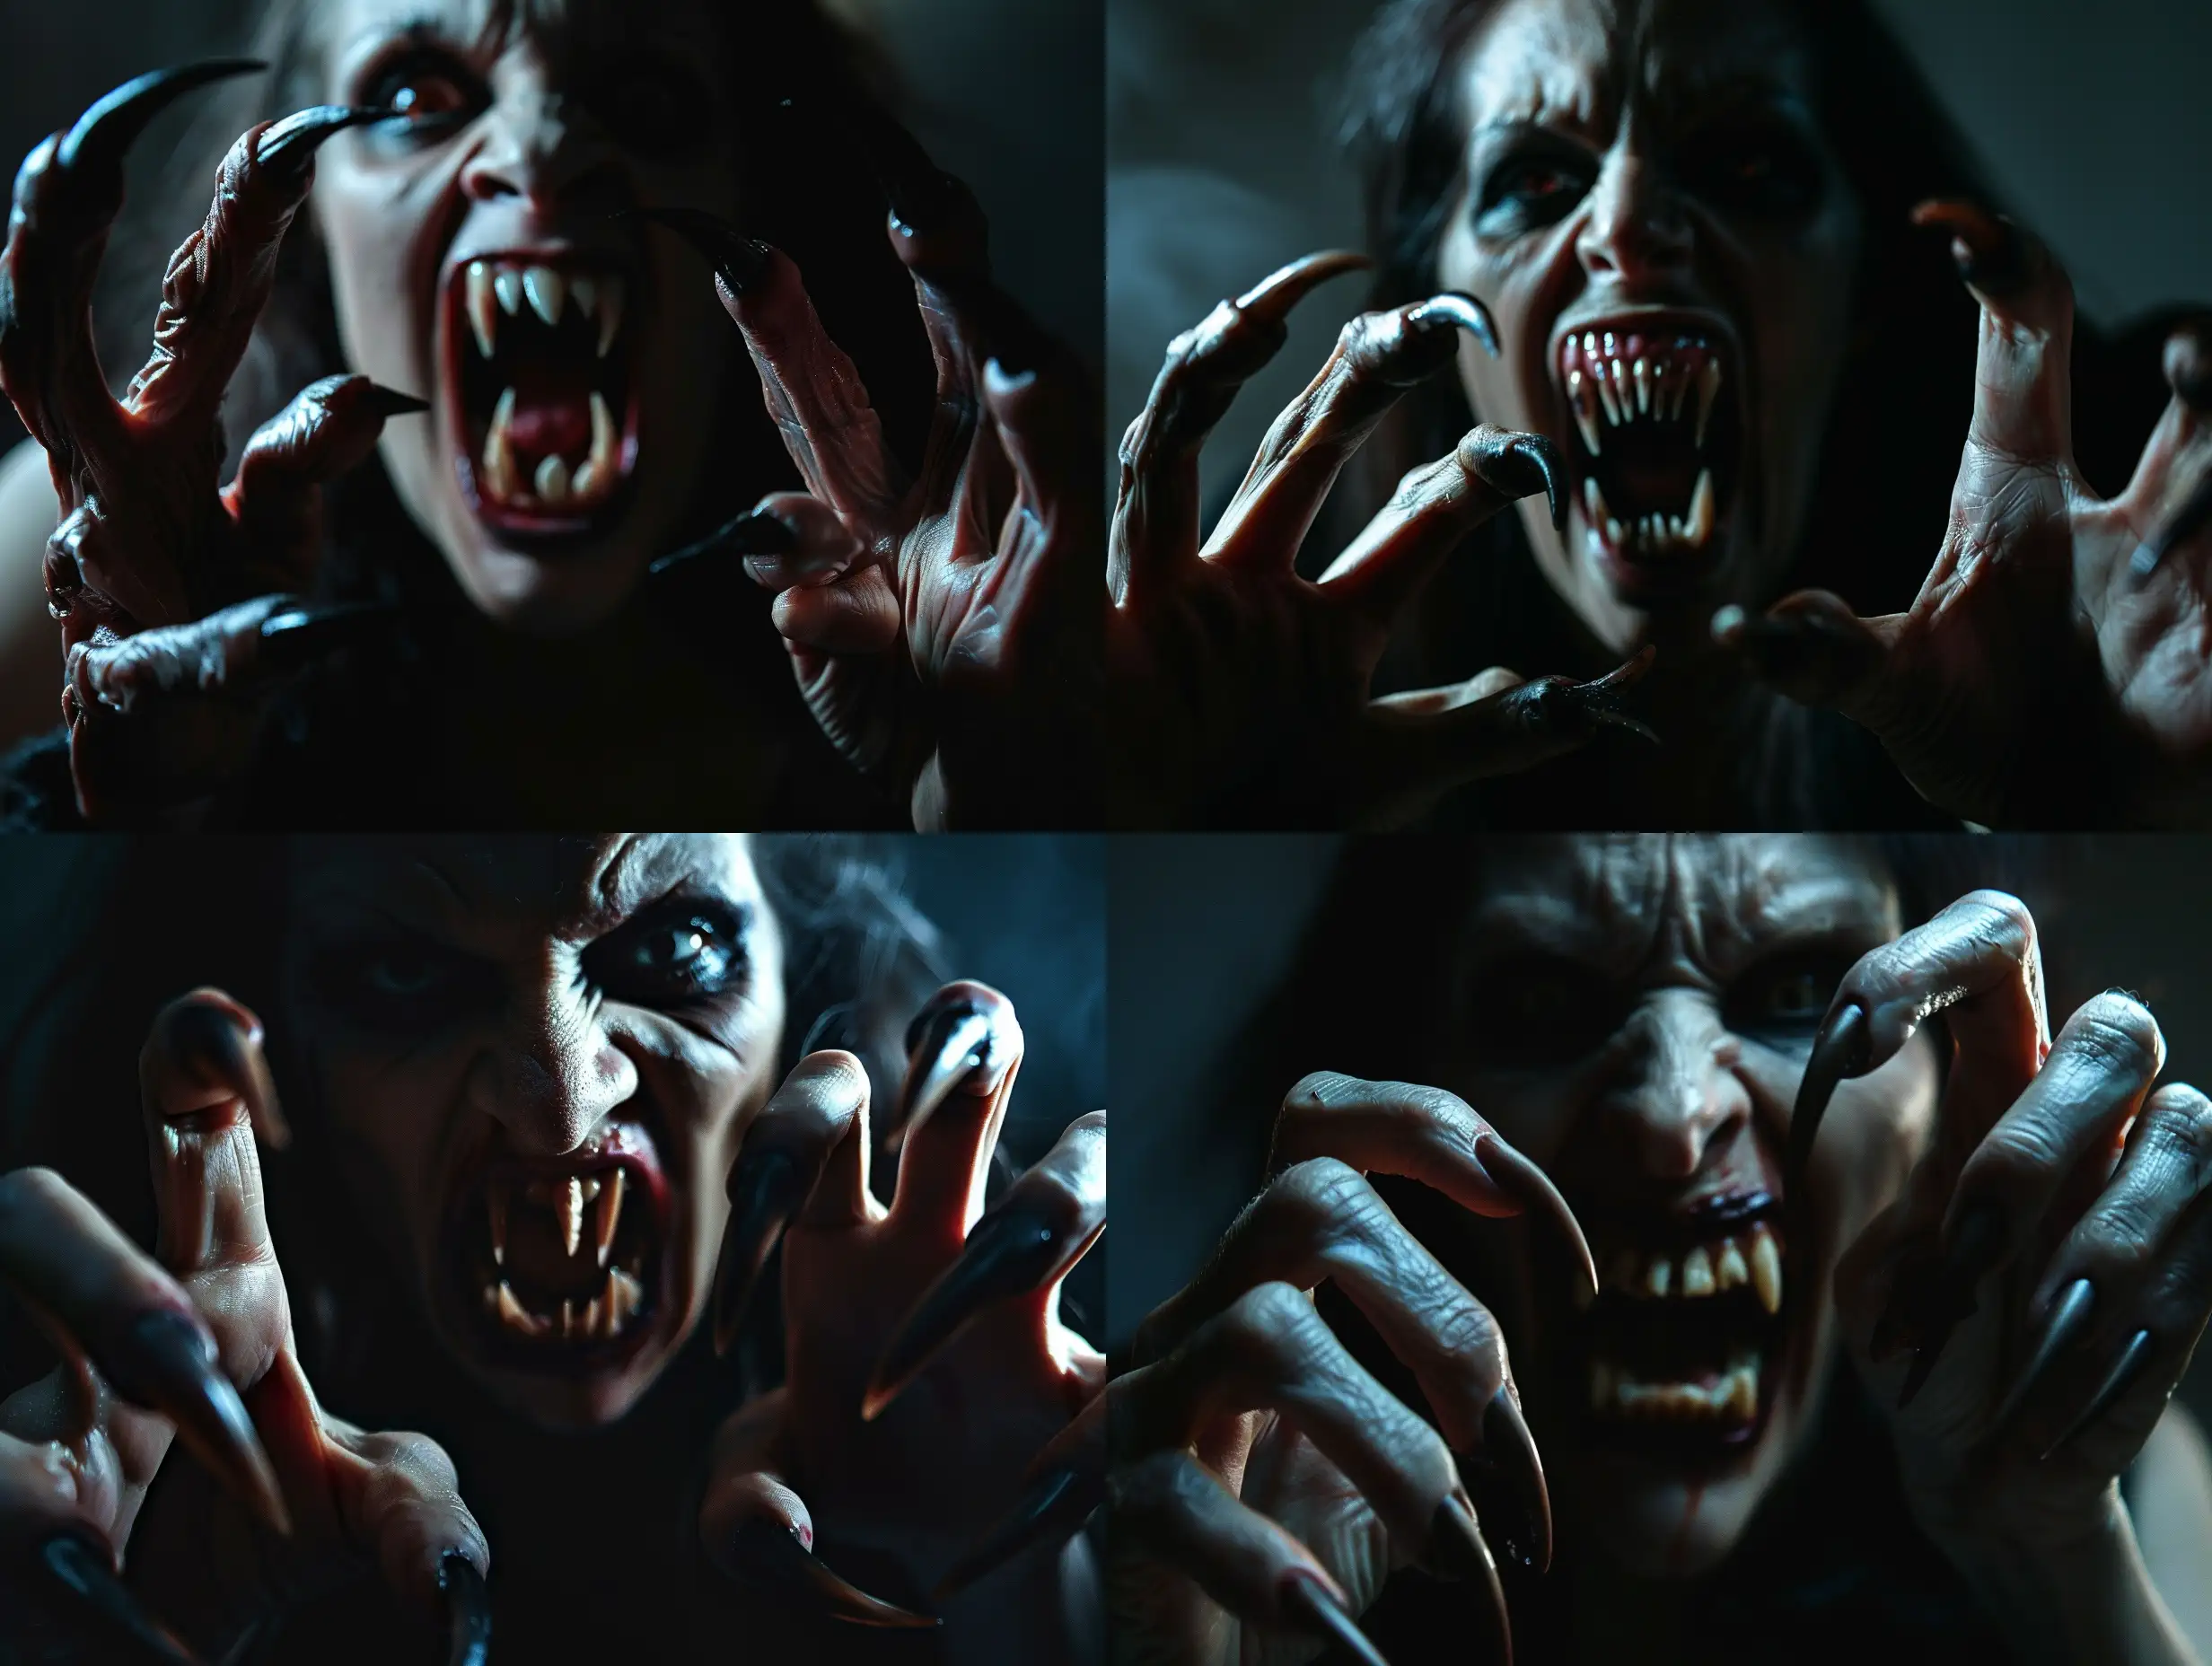 Eerie-Photorealistic-Portrait-of-a-Wild-Vampire-Woman-with-Fangs-and-Claws